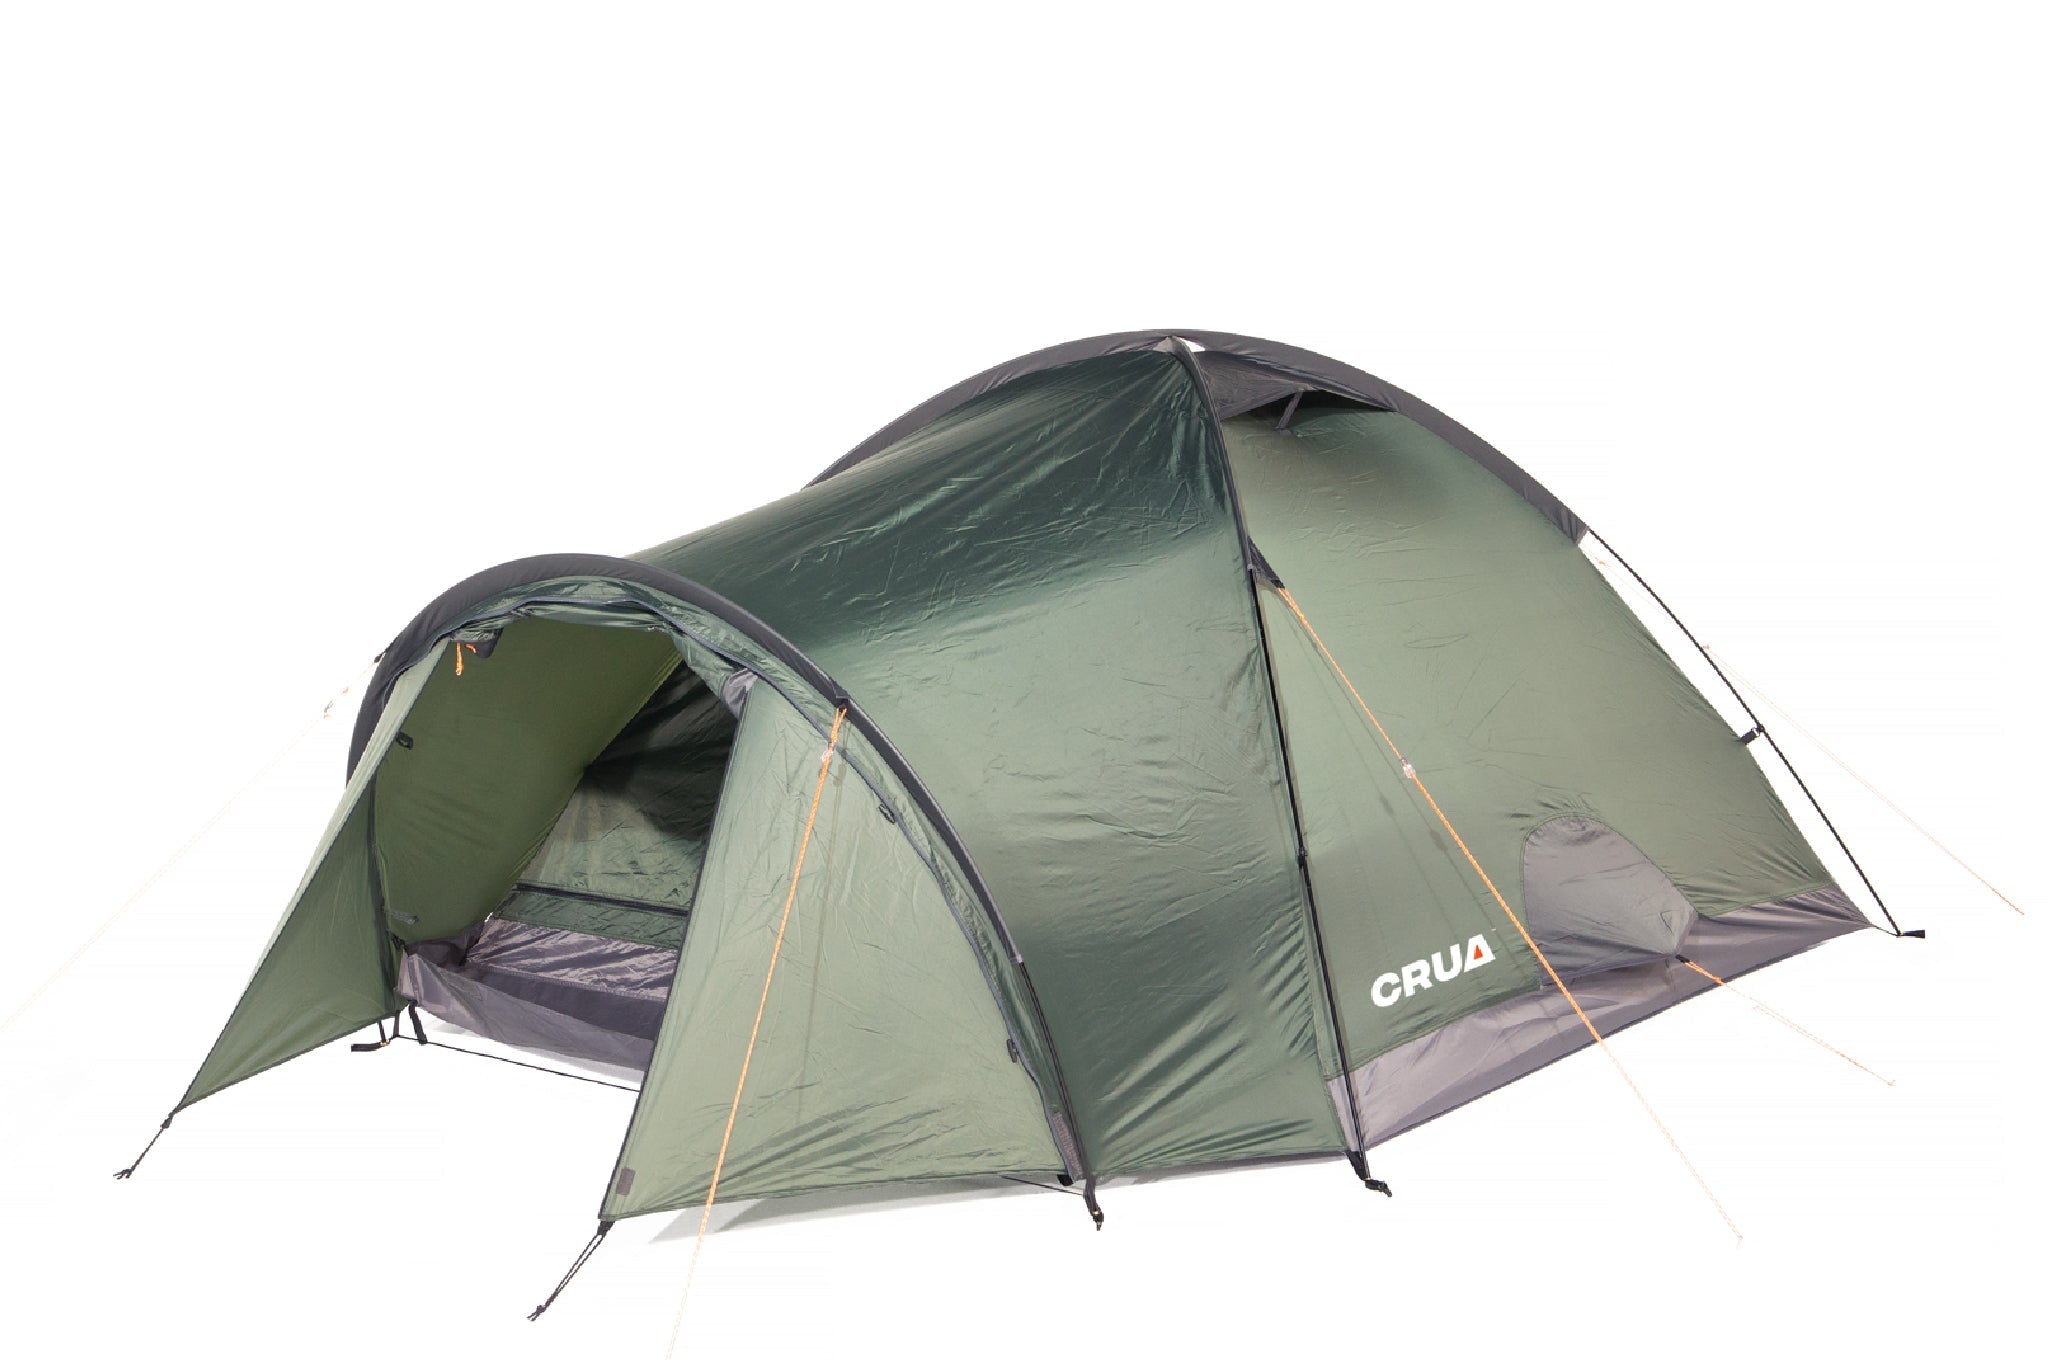 DUO MAXX & CULLA MAXX | INNER & OUTER TENT FULL KIT | 3 PERSON